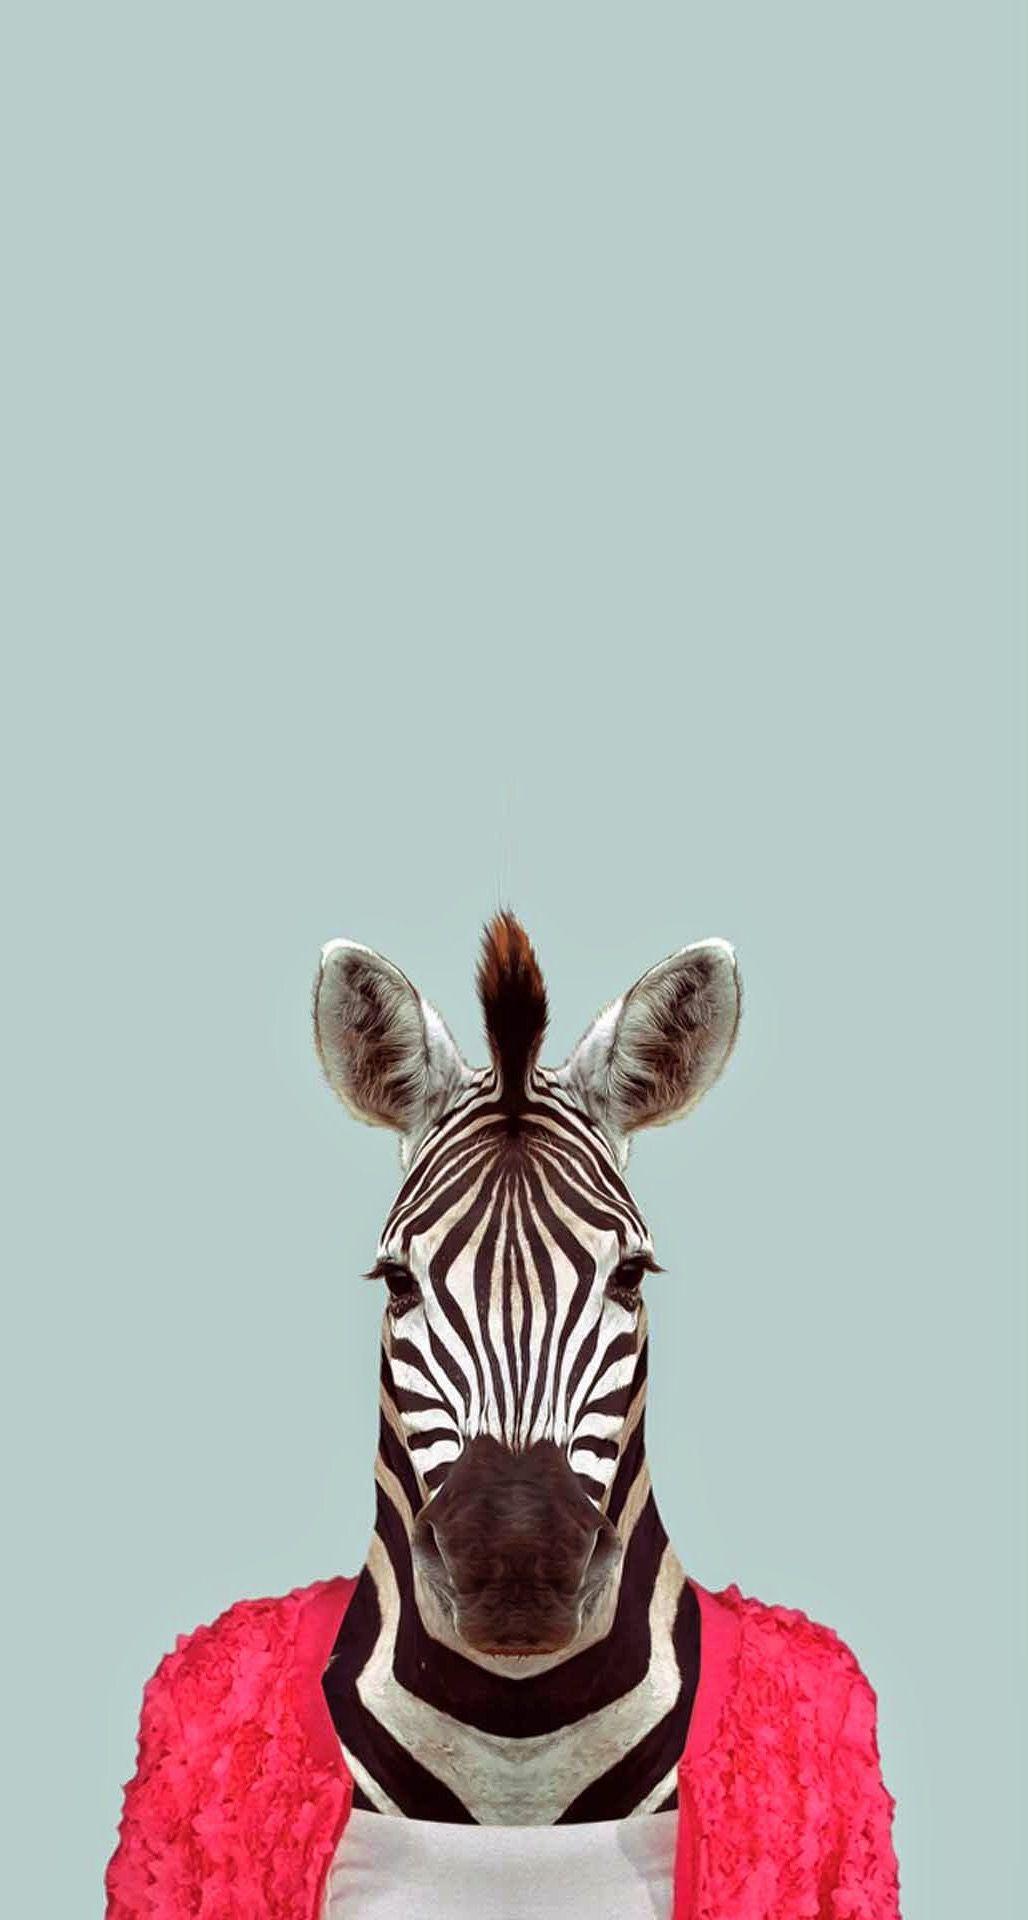 Funny Animal Iphone Wallpapers Top Free Funny Animal Iphone Backgrounds Wallpaperaccess